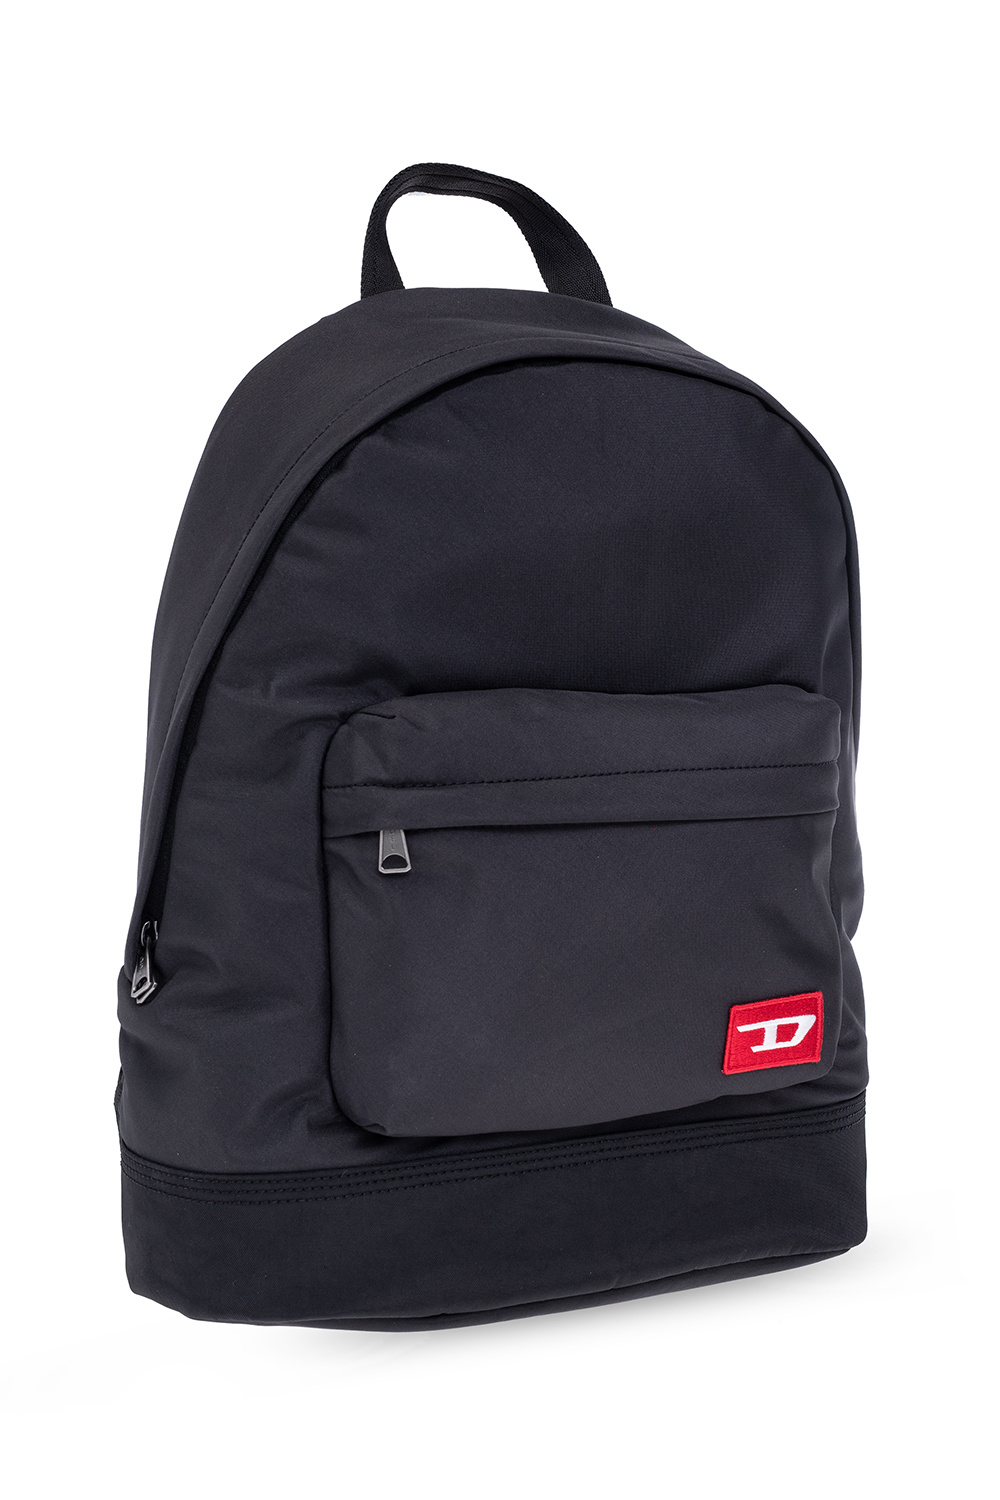 Diesel ‘Farb’ for backpack